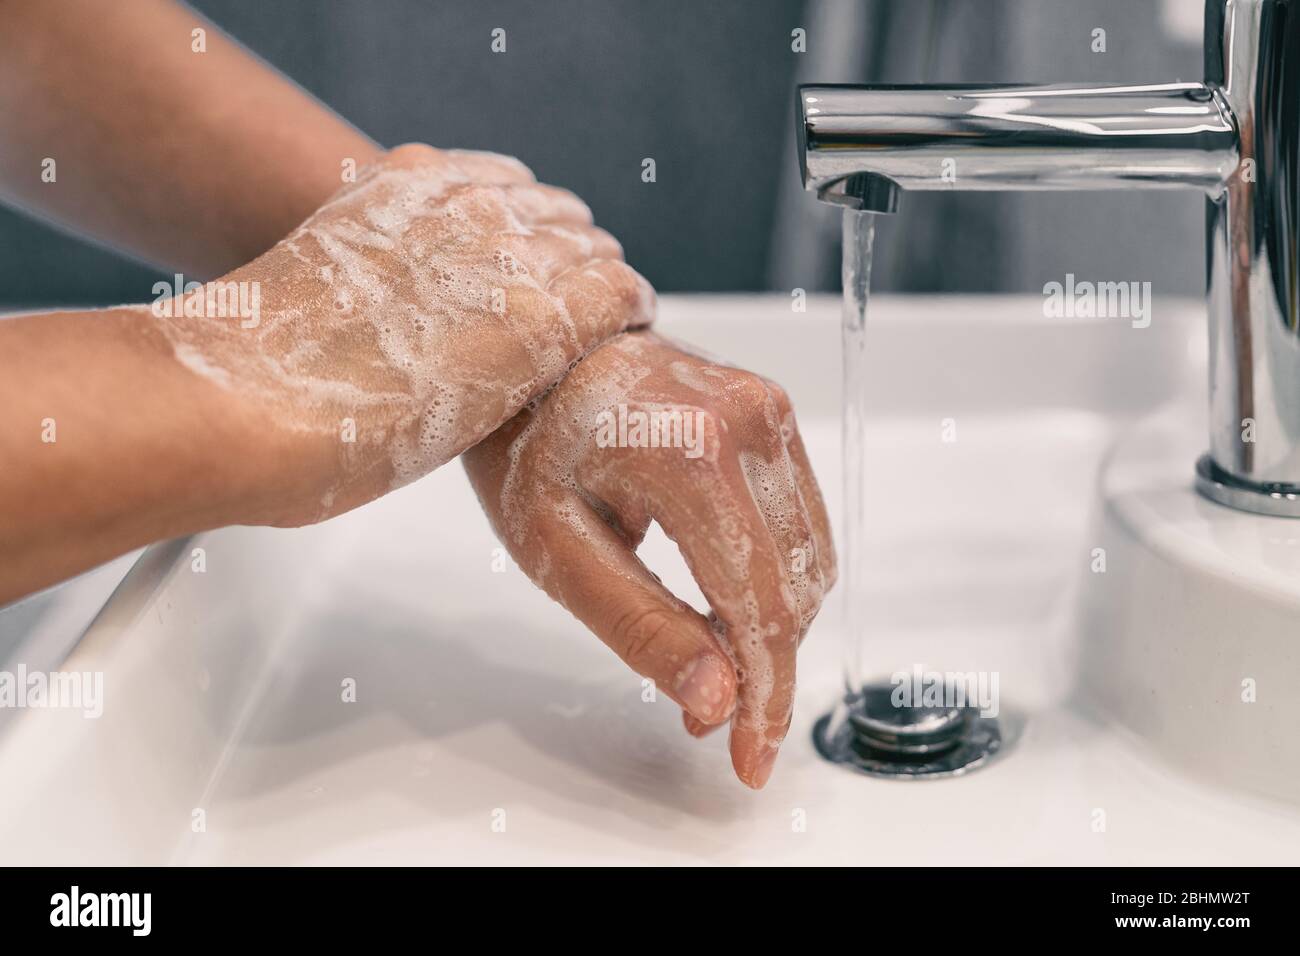 Hand washing personal hygiene woman washing hands rubbing soap for 20 seconds following steps, cleaning wrists and rinsing under water at home bathroom. COVID-19 infection prevention handwashing. Stock Photo